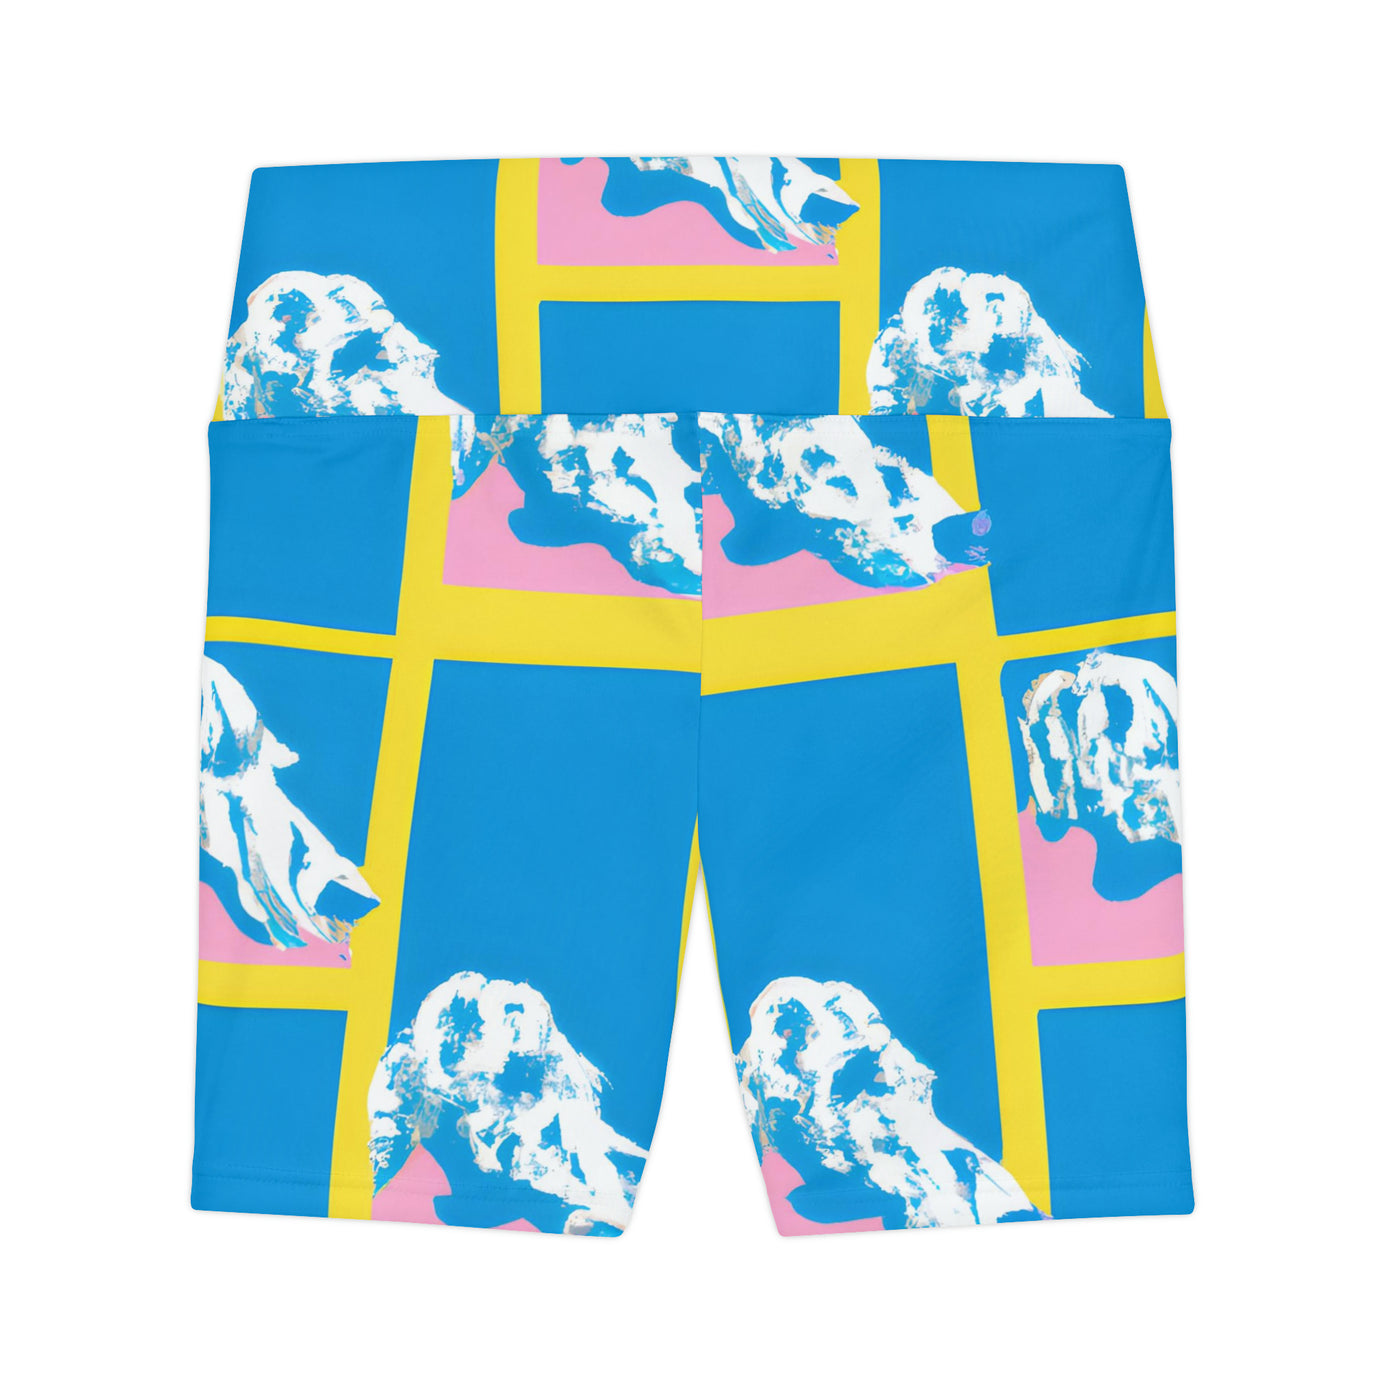 "Furrever Friends - A Celebration of Fun Doggy Adventures Women's Workout Shorts